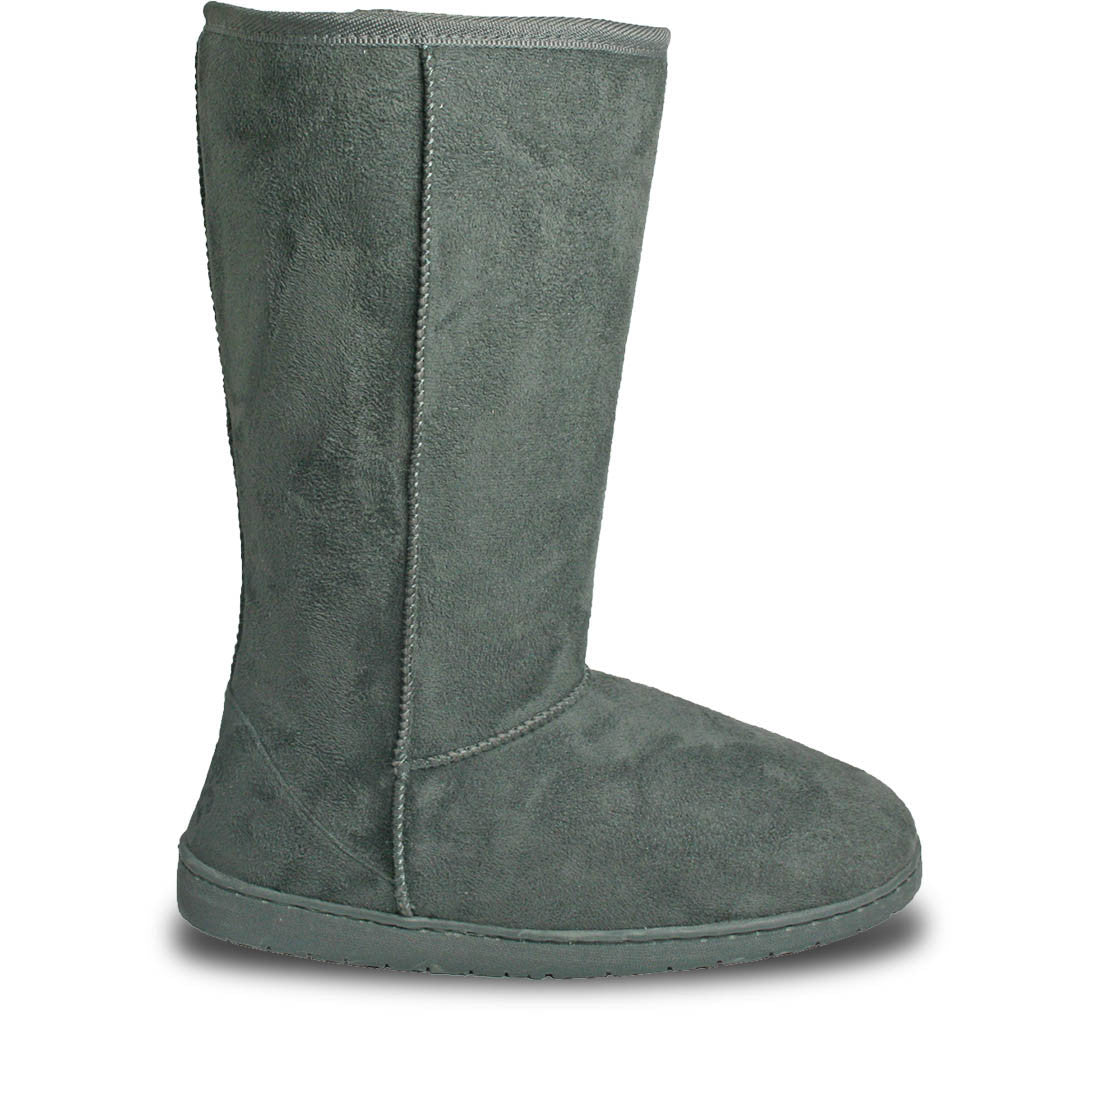 Image of Women's 13-inch Microfiber Boots - Gray